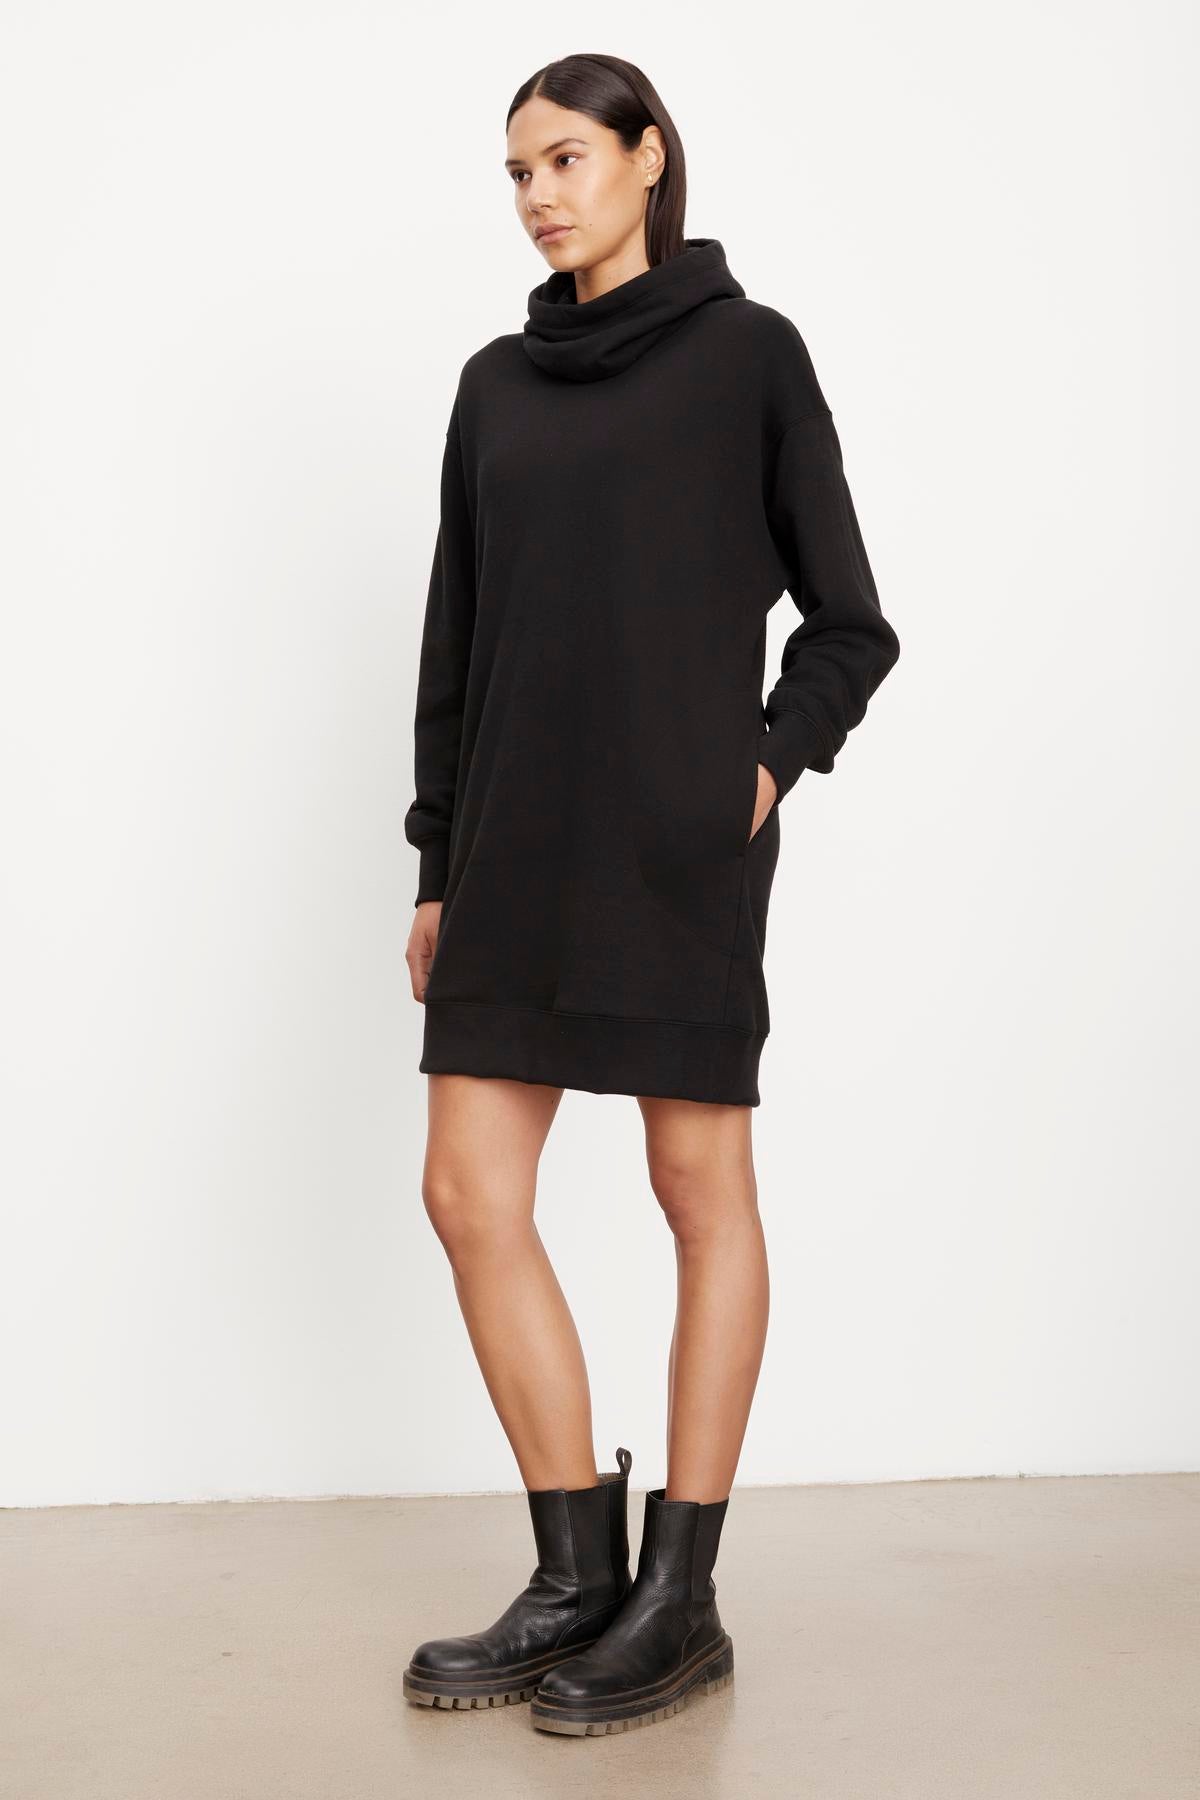 A woman in a black YARA SOFT FLEECE HOODIE DRESS by Velvet by Graham & Spencer and black boots standing against a plain background.-35696174399681